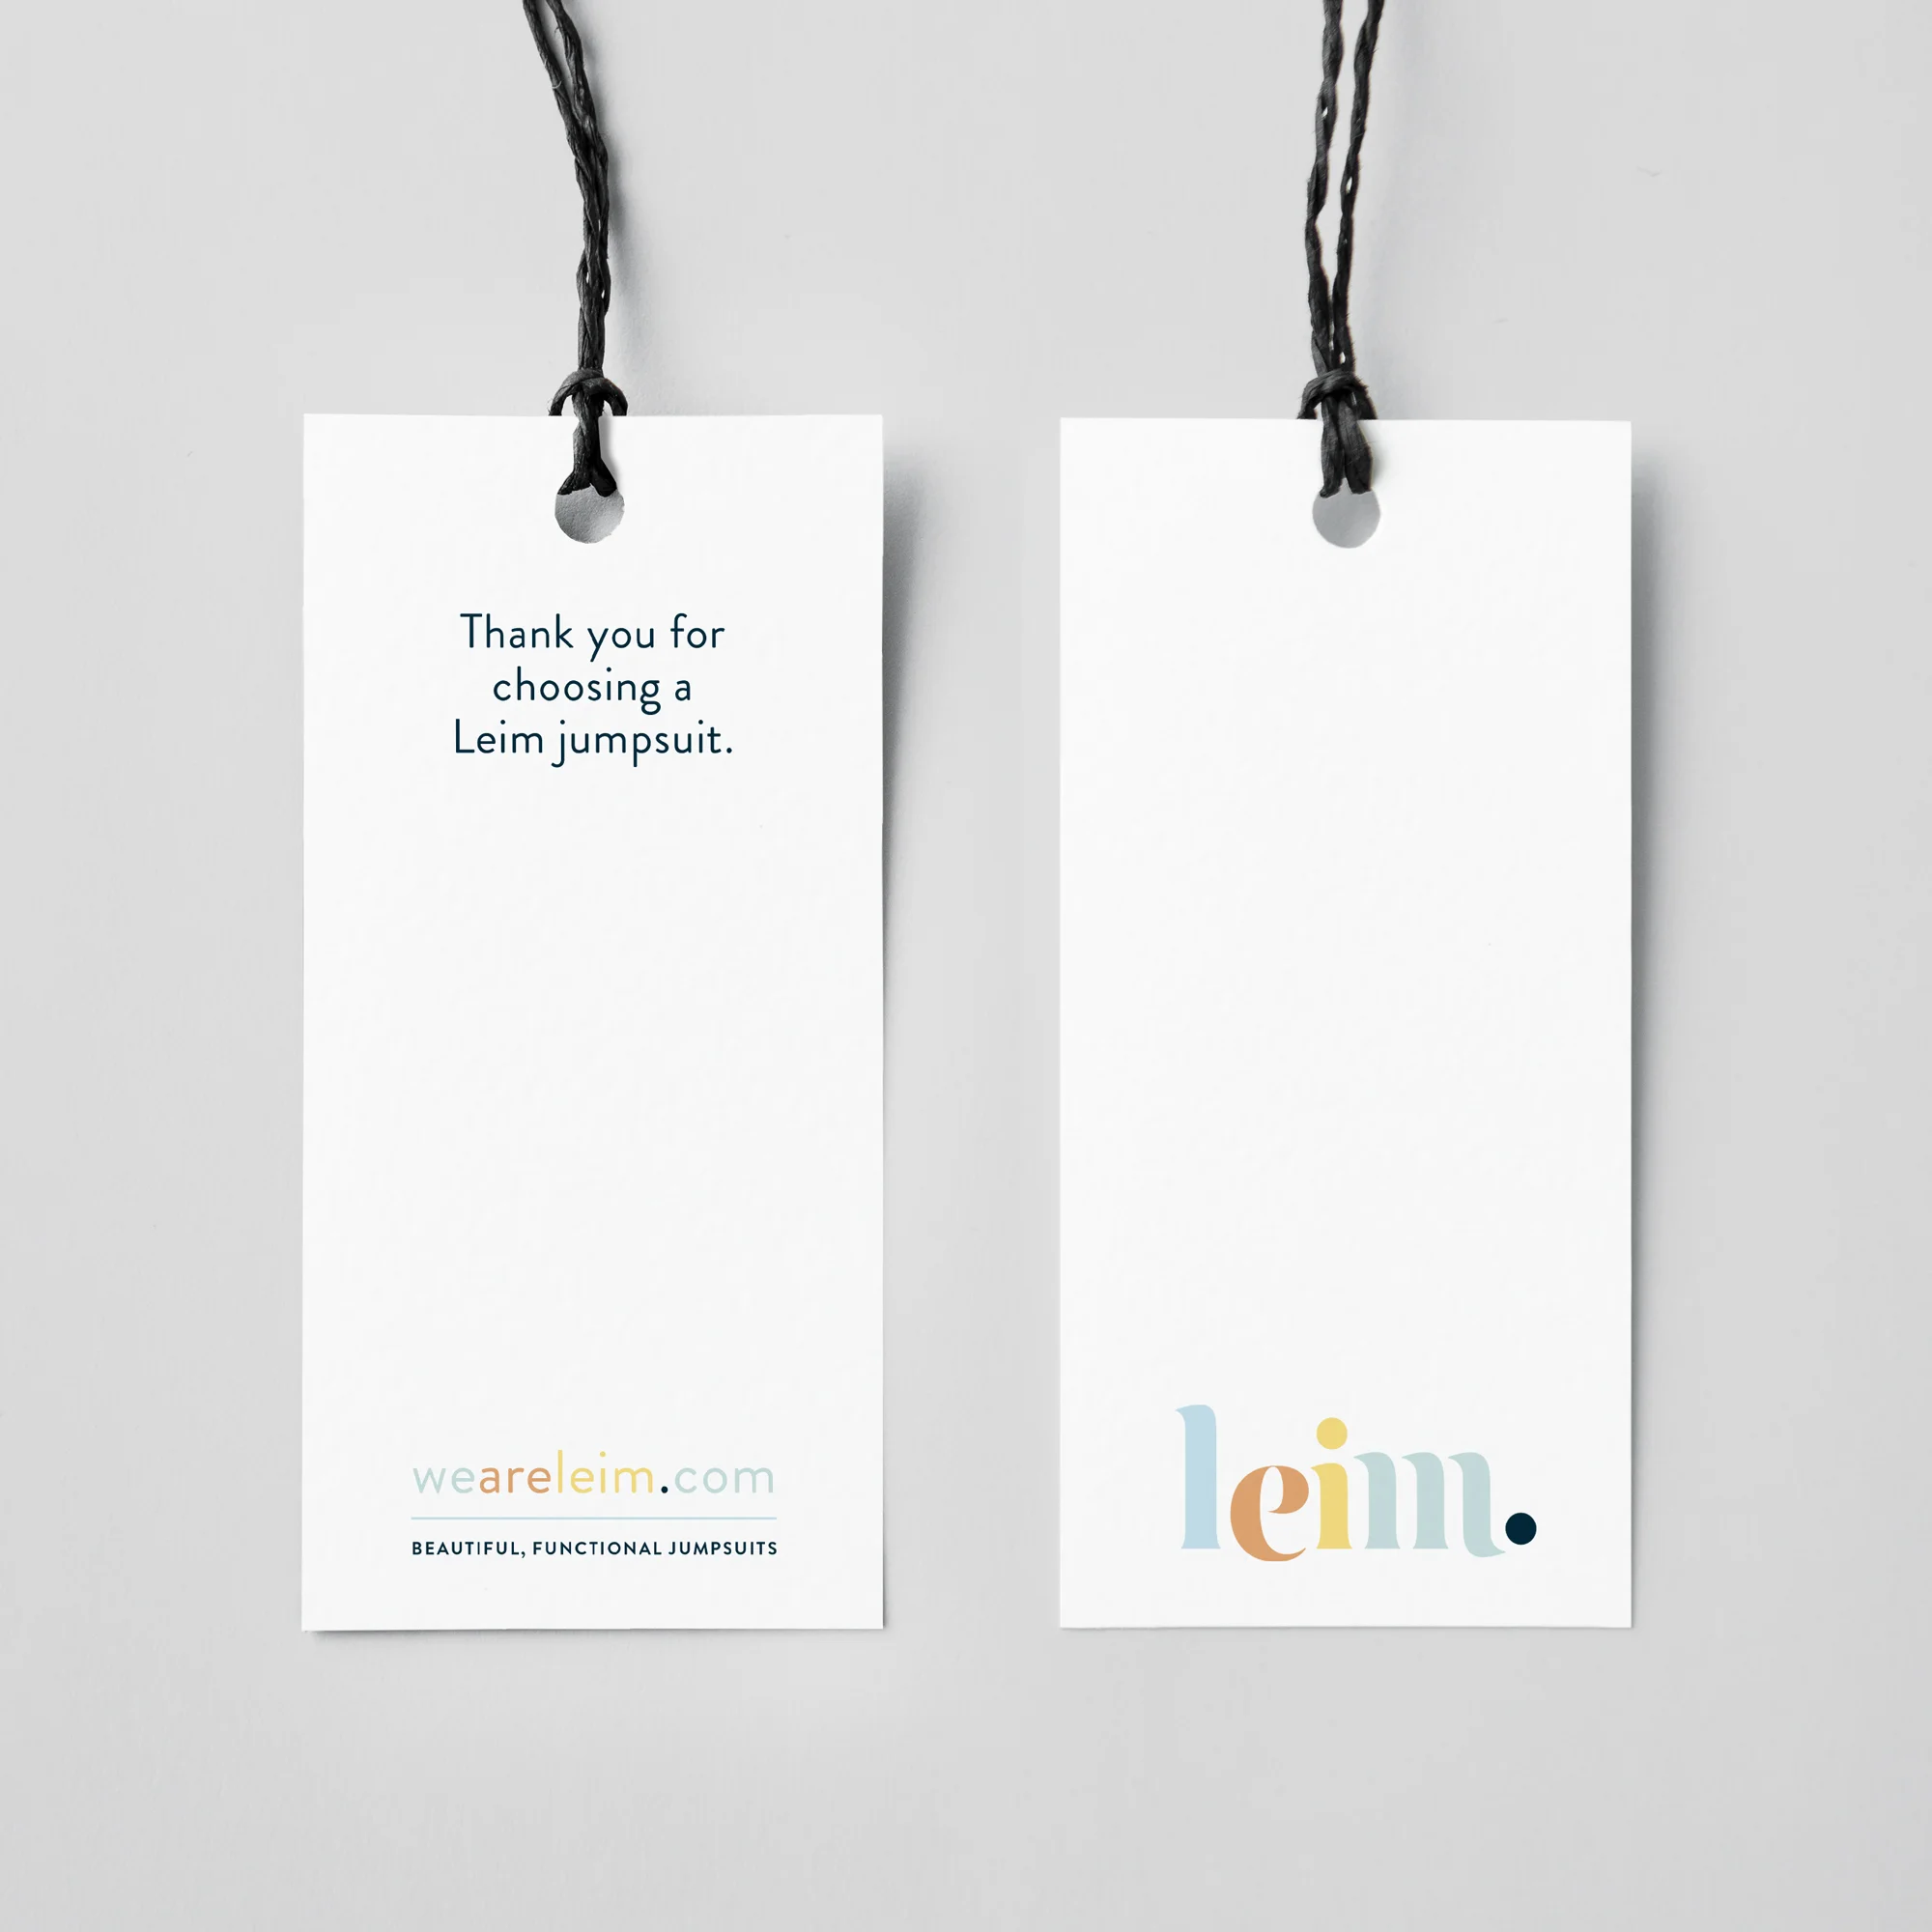 a mockup showing the front and back of Leim's swingtags designed by Petits Papiers